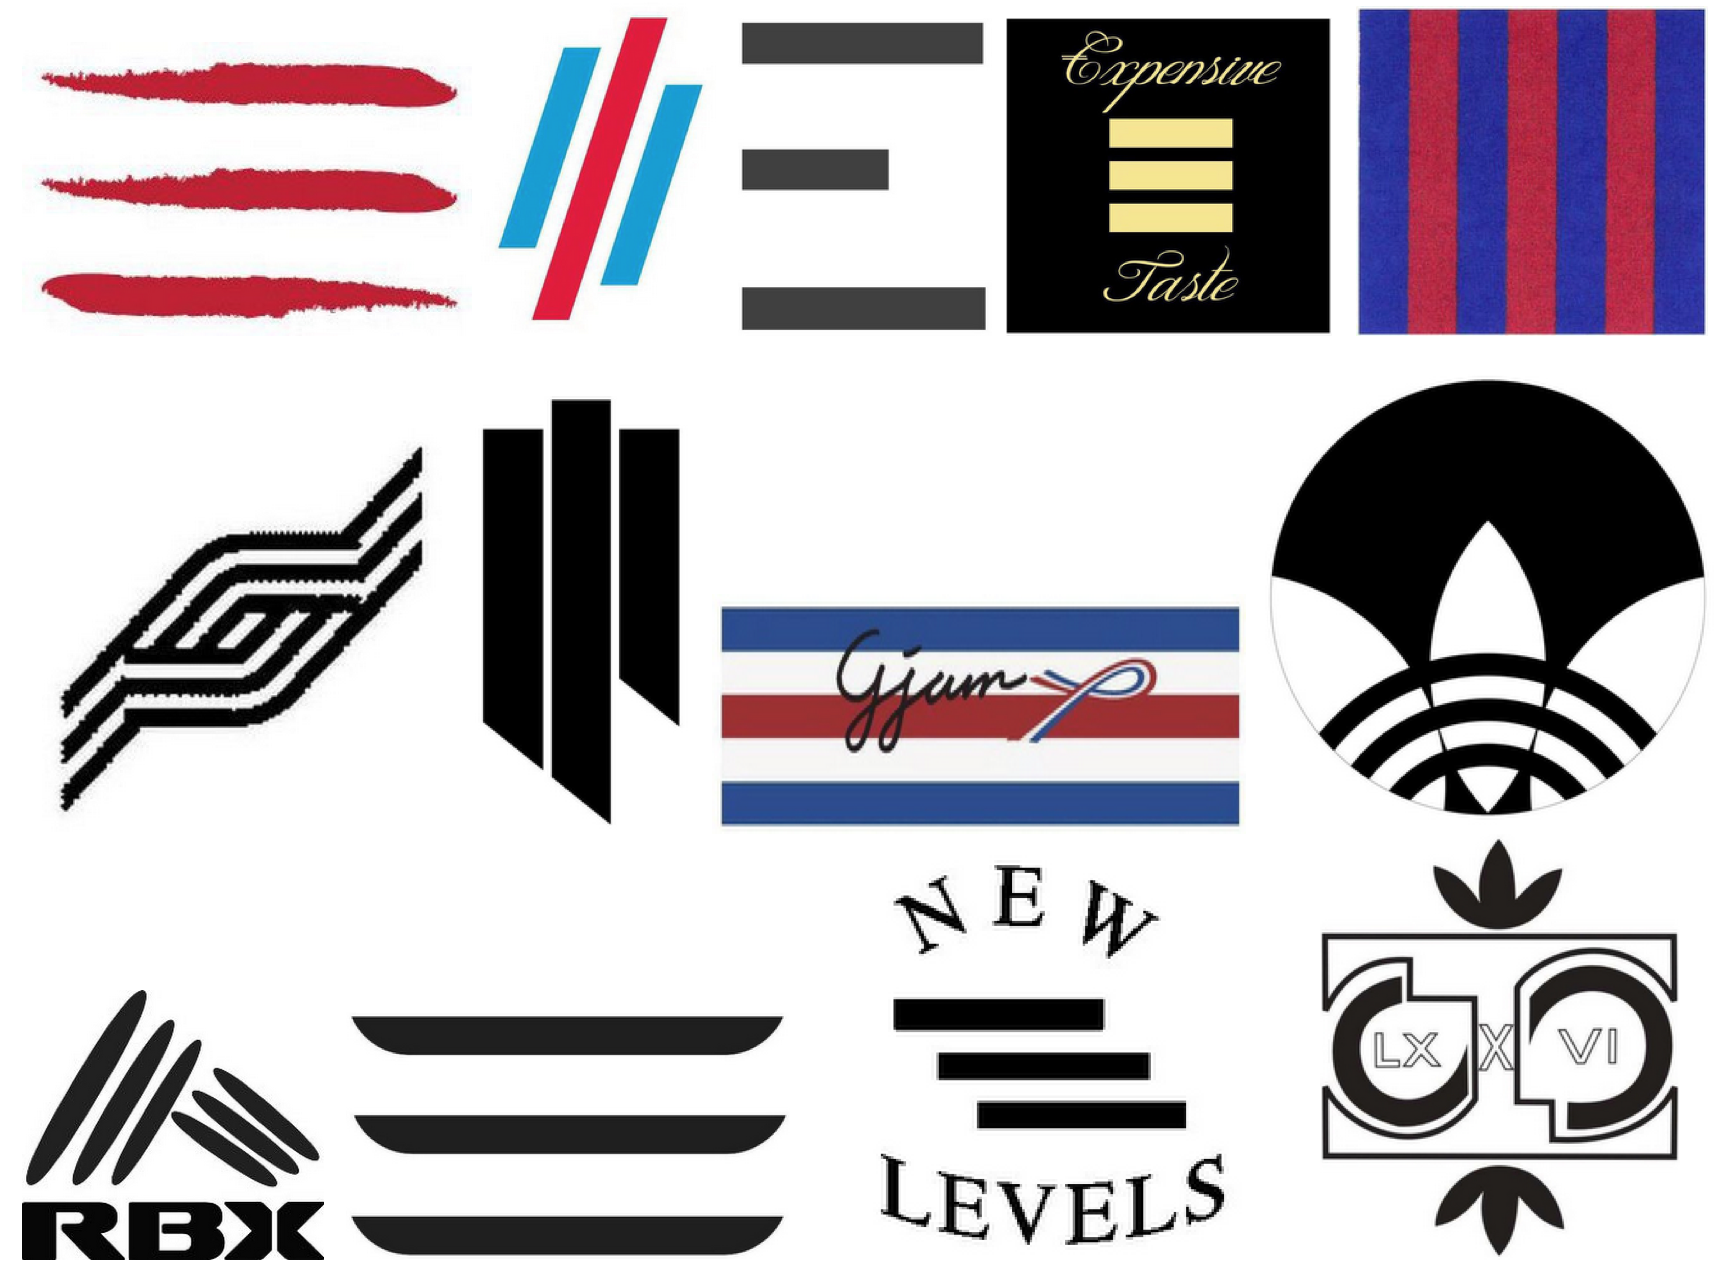  Some of the trademarks opposed by Adidas 